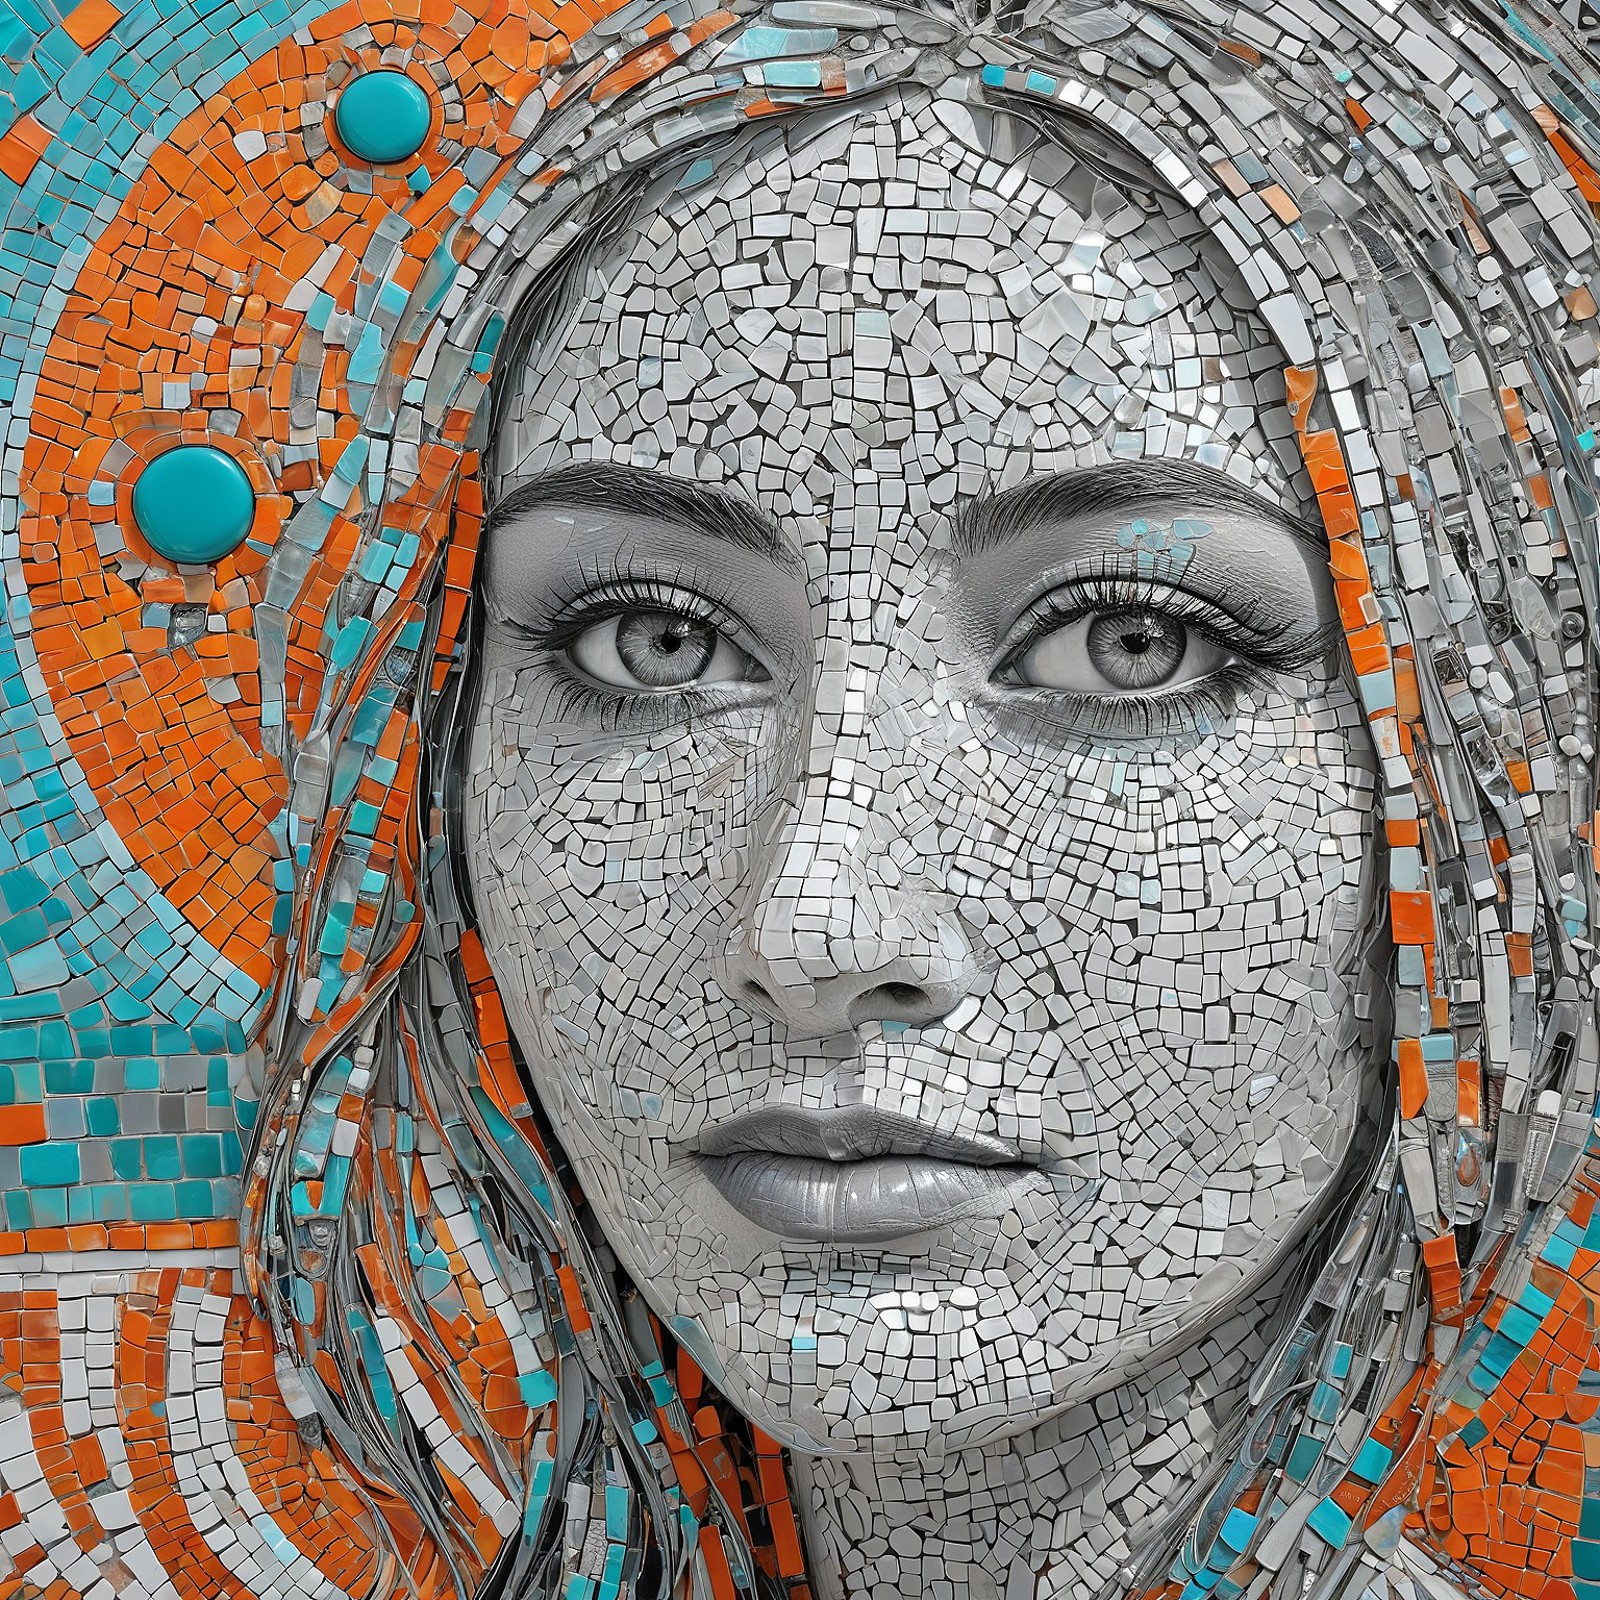 Portrait of a colorless woman against turquoise and orange, her vibrant details replaced by a monochrome mosaic